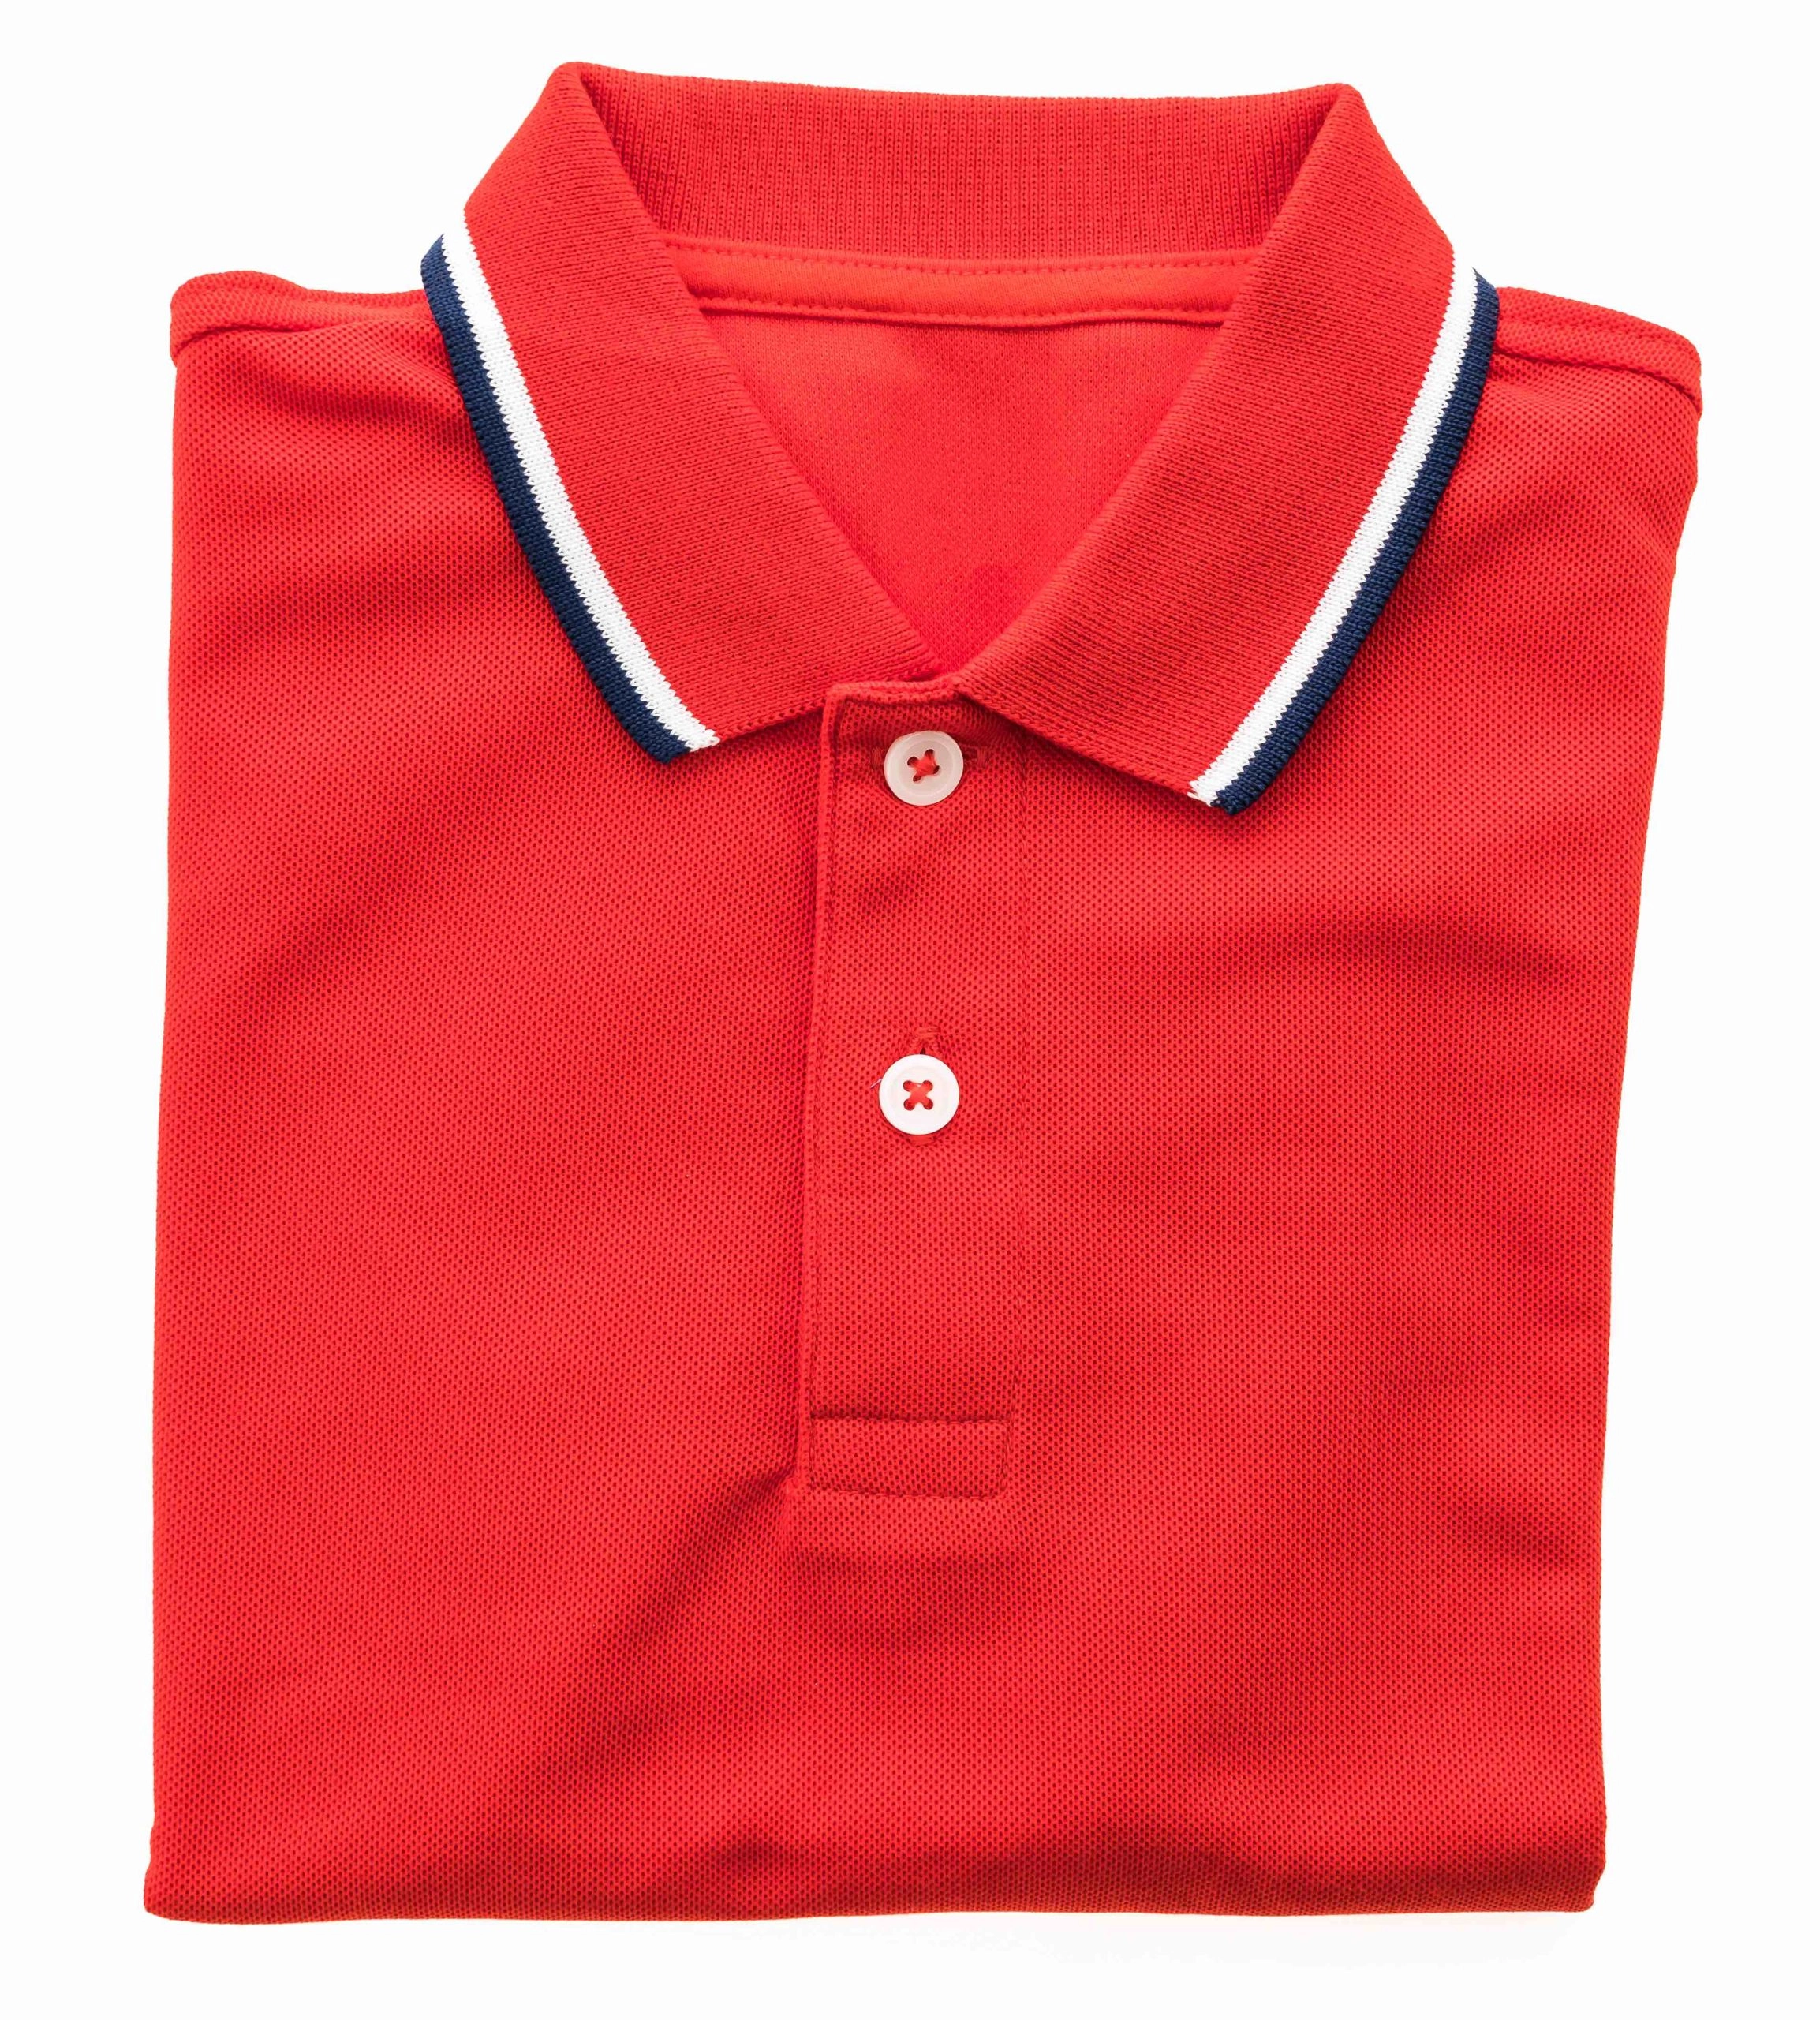 Stripped Collar And Cuff Polo Shirts Supplier from Bangladesh